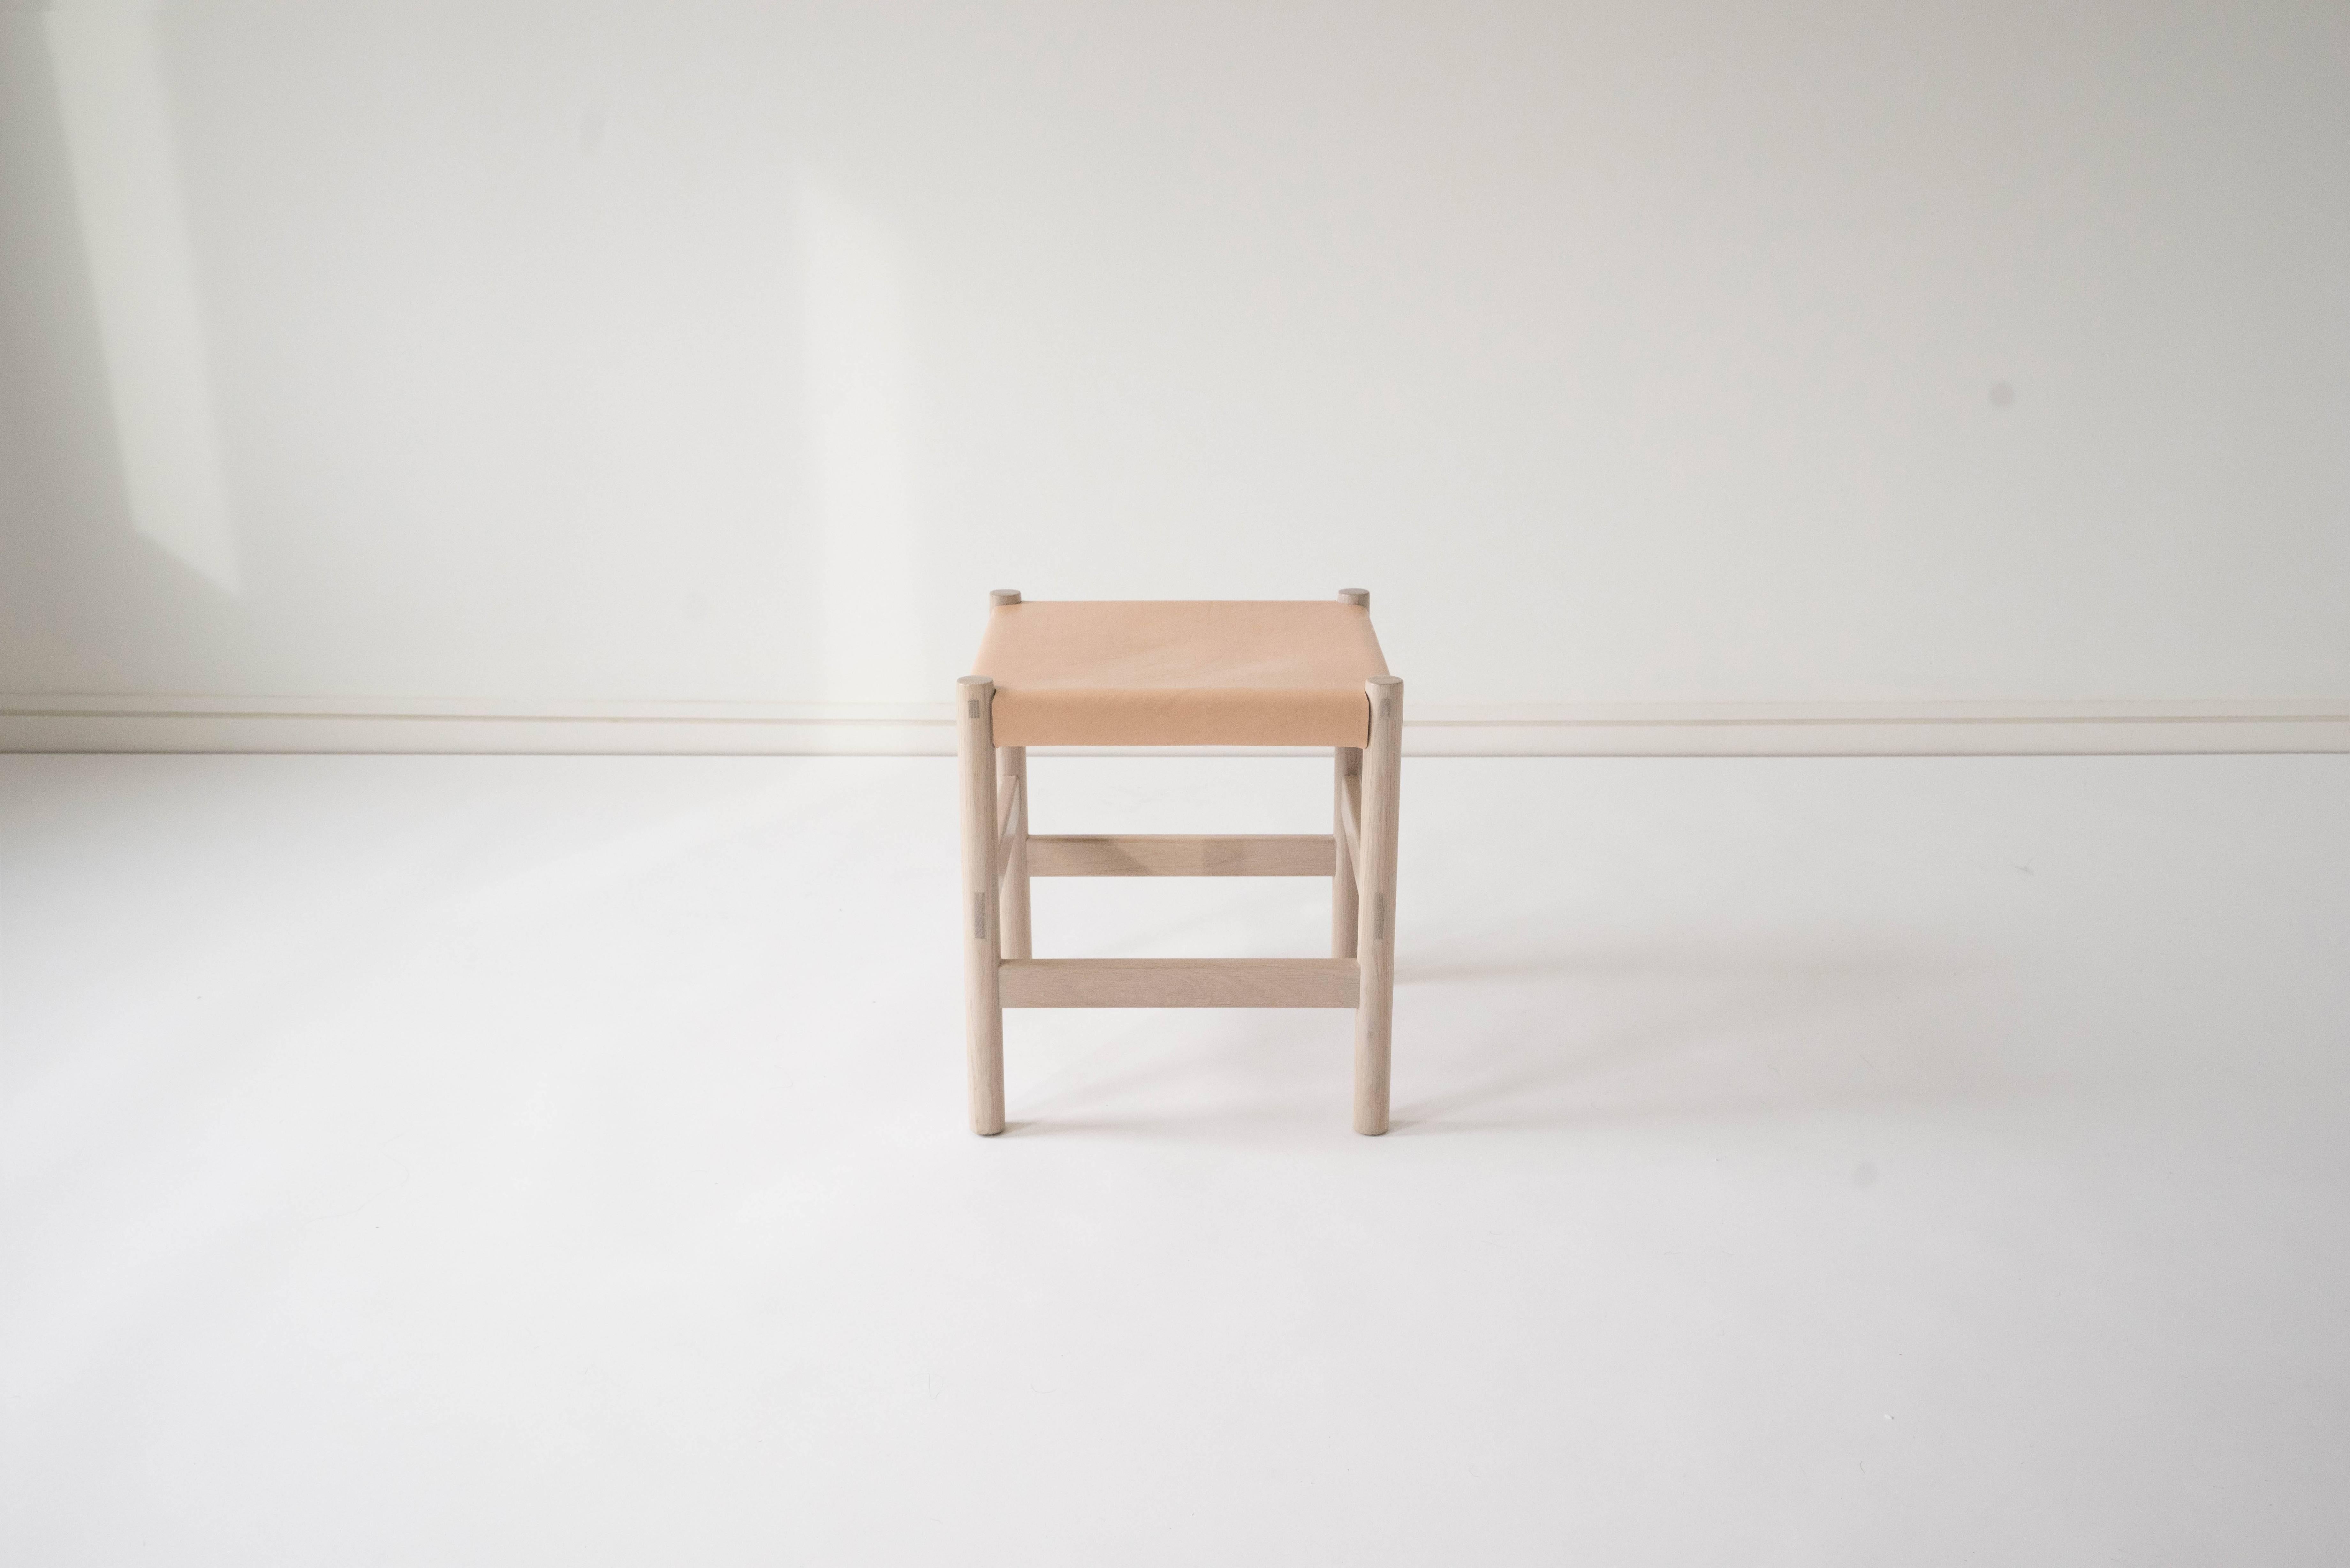 Sun at Six is a Brooklyn design studio. We work with traditional Chinese joinery masters to handcraft our pieces using traditional joinery. Handcrafted using traditional joinery. A simple, versatile stool. The vegetable tanned leather will patina